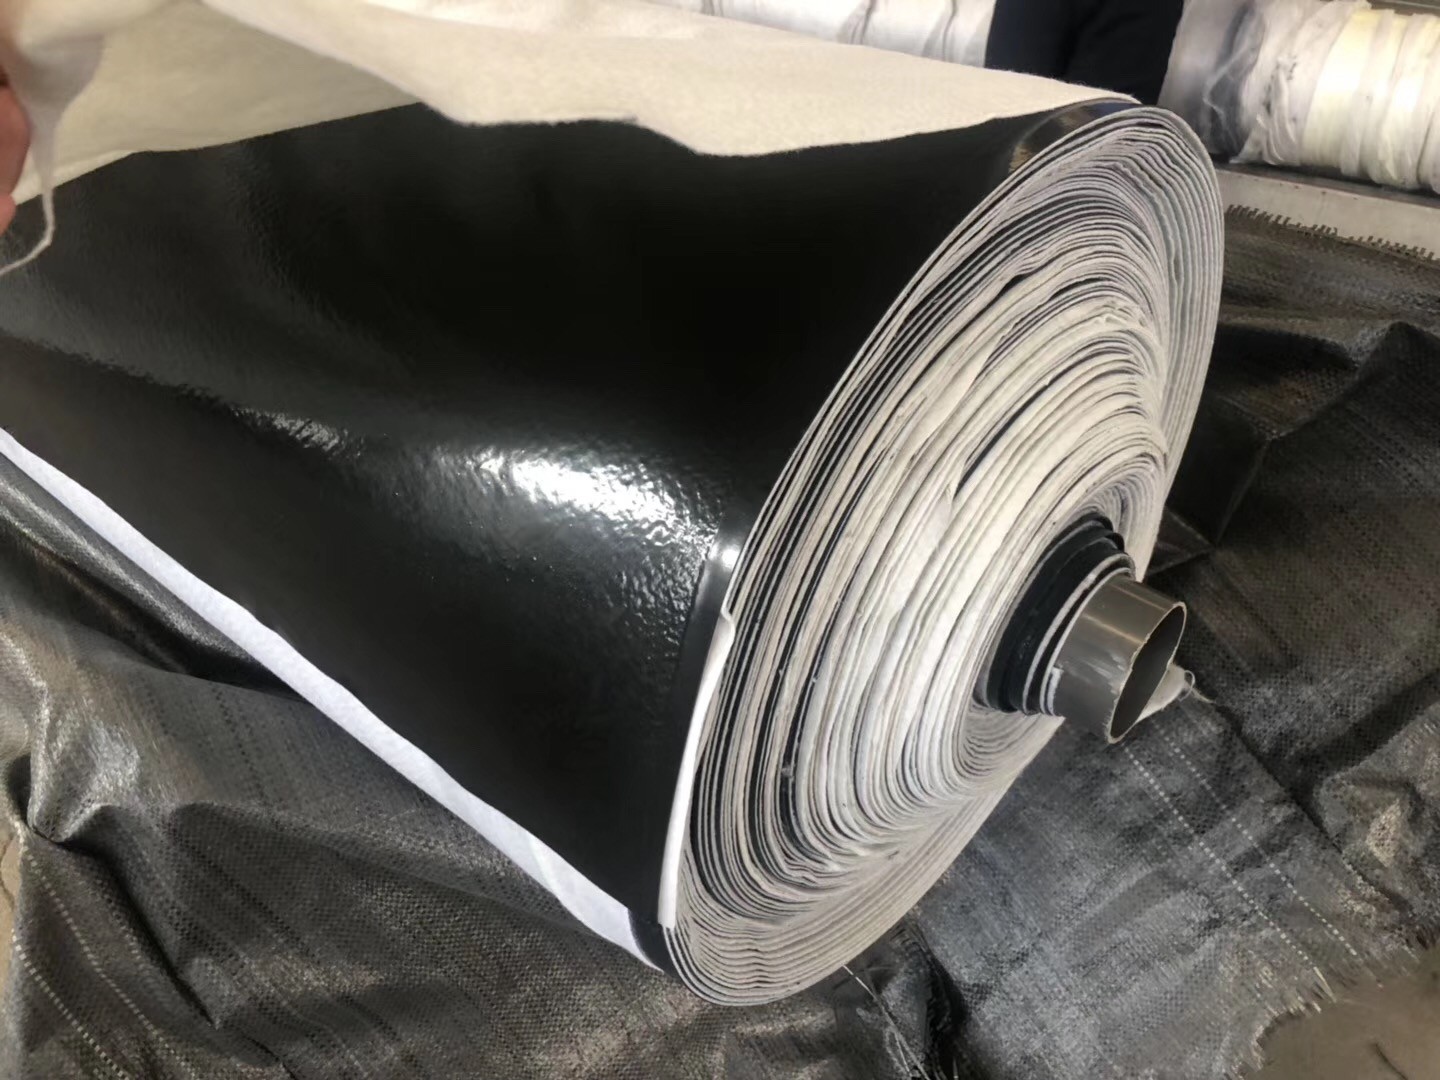 Geomembrane liners